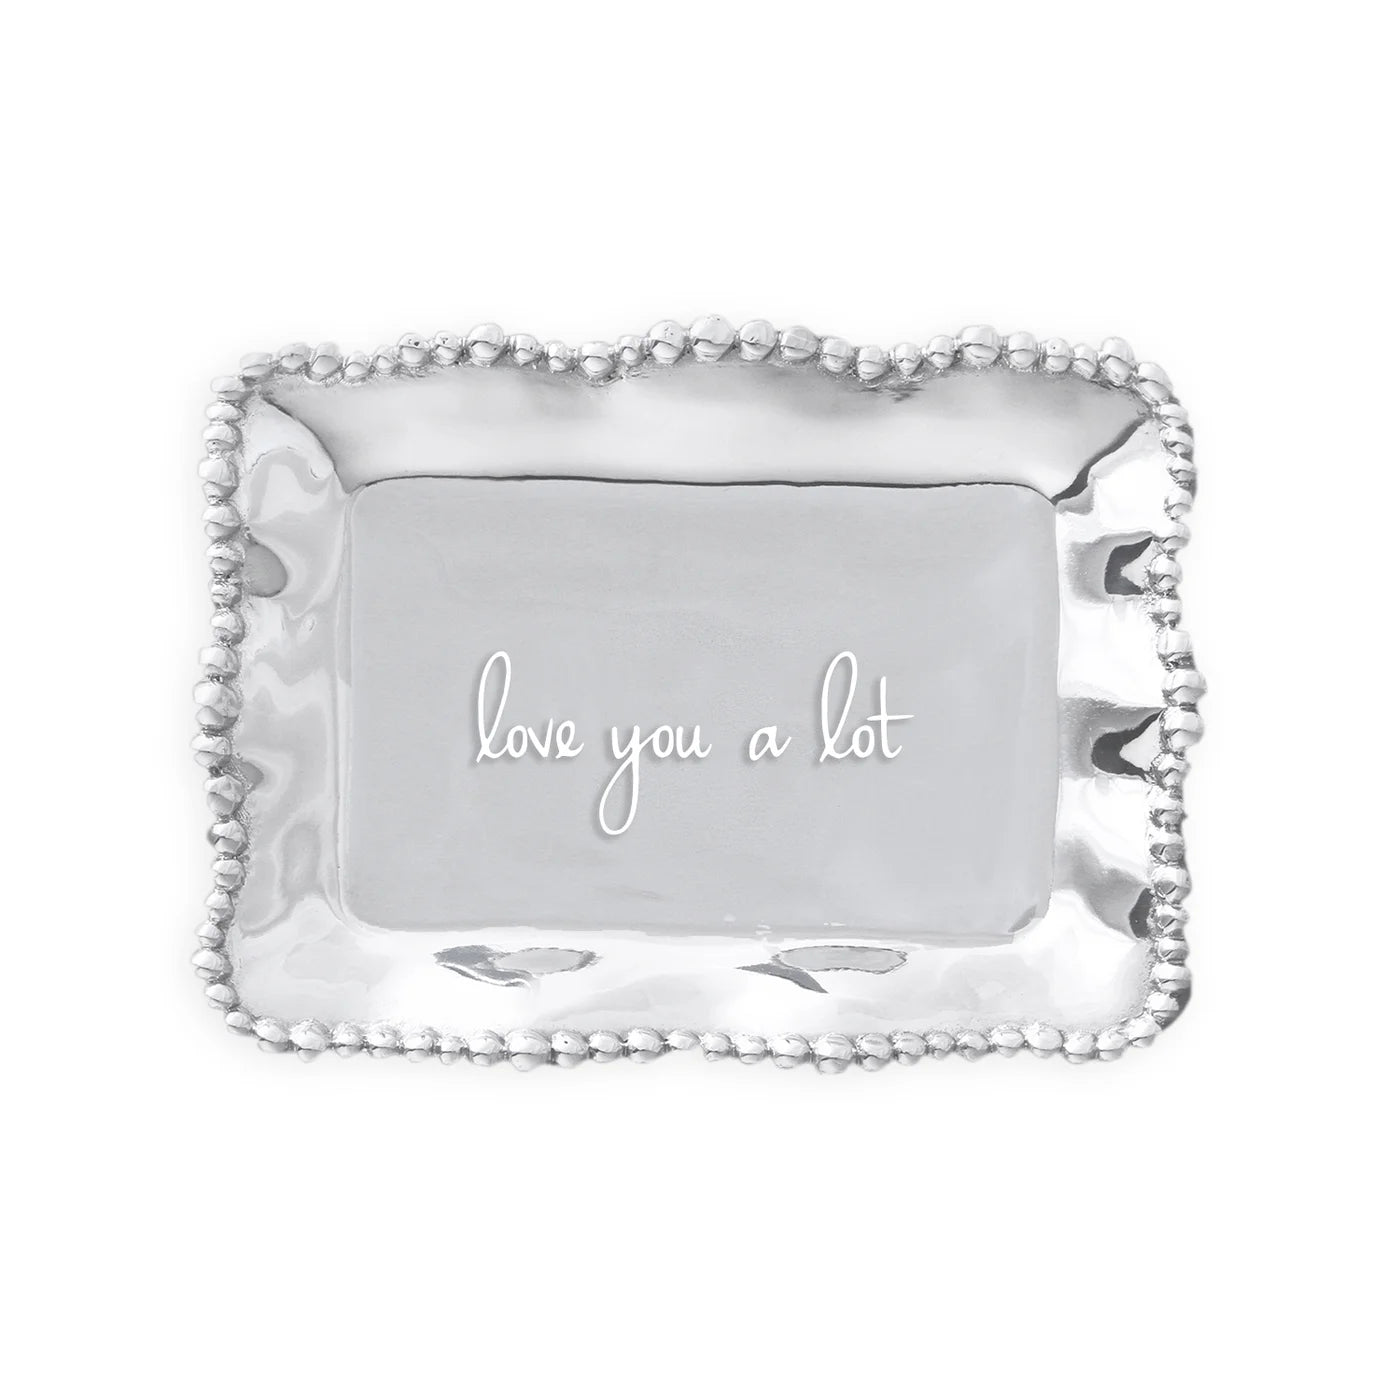 Pearl Rectangular Engraved Tray "love you a lot"